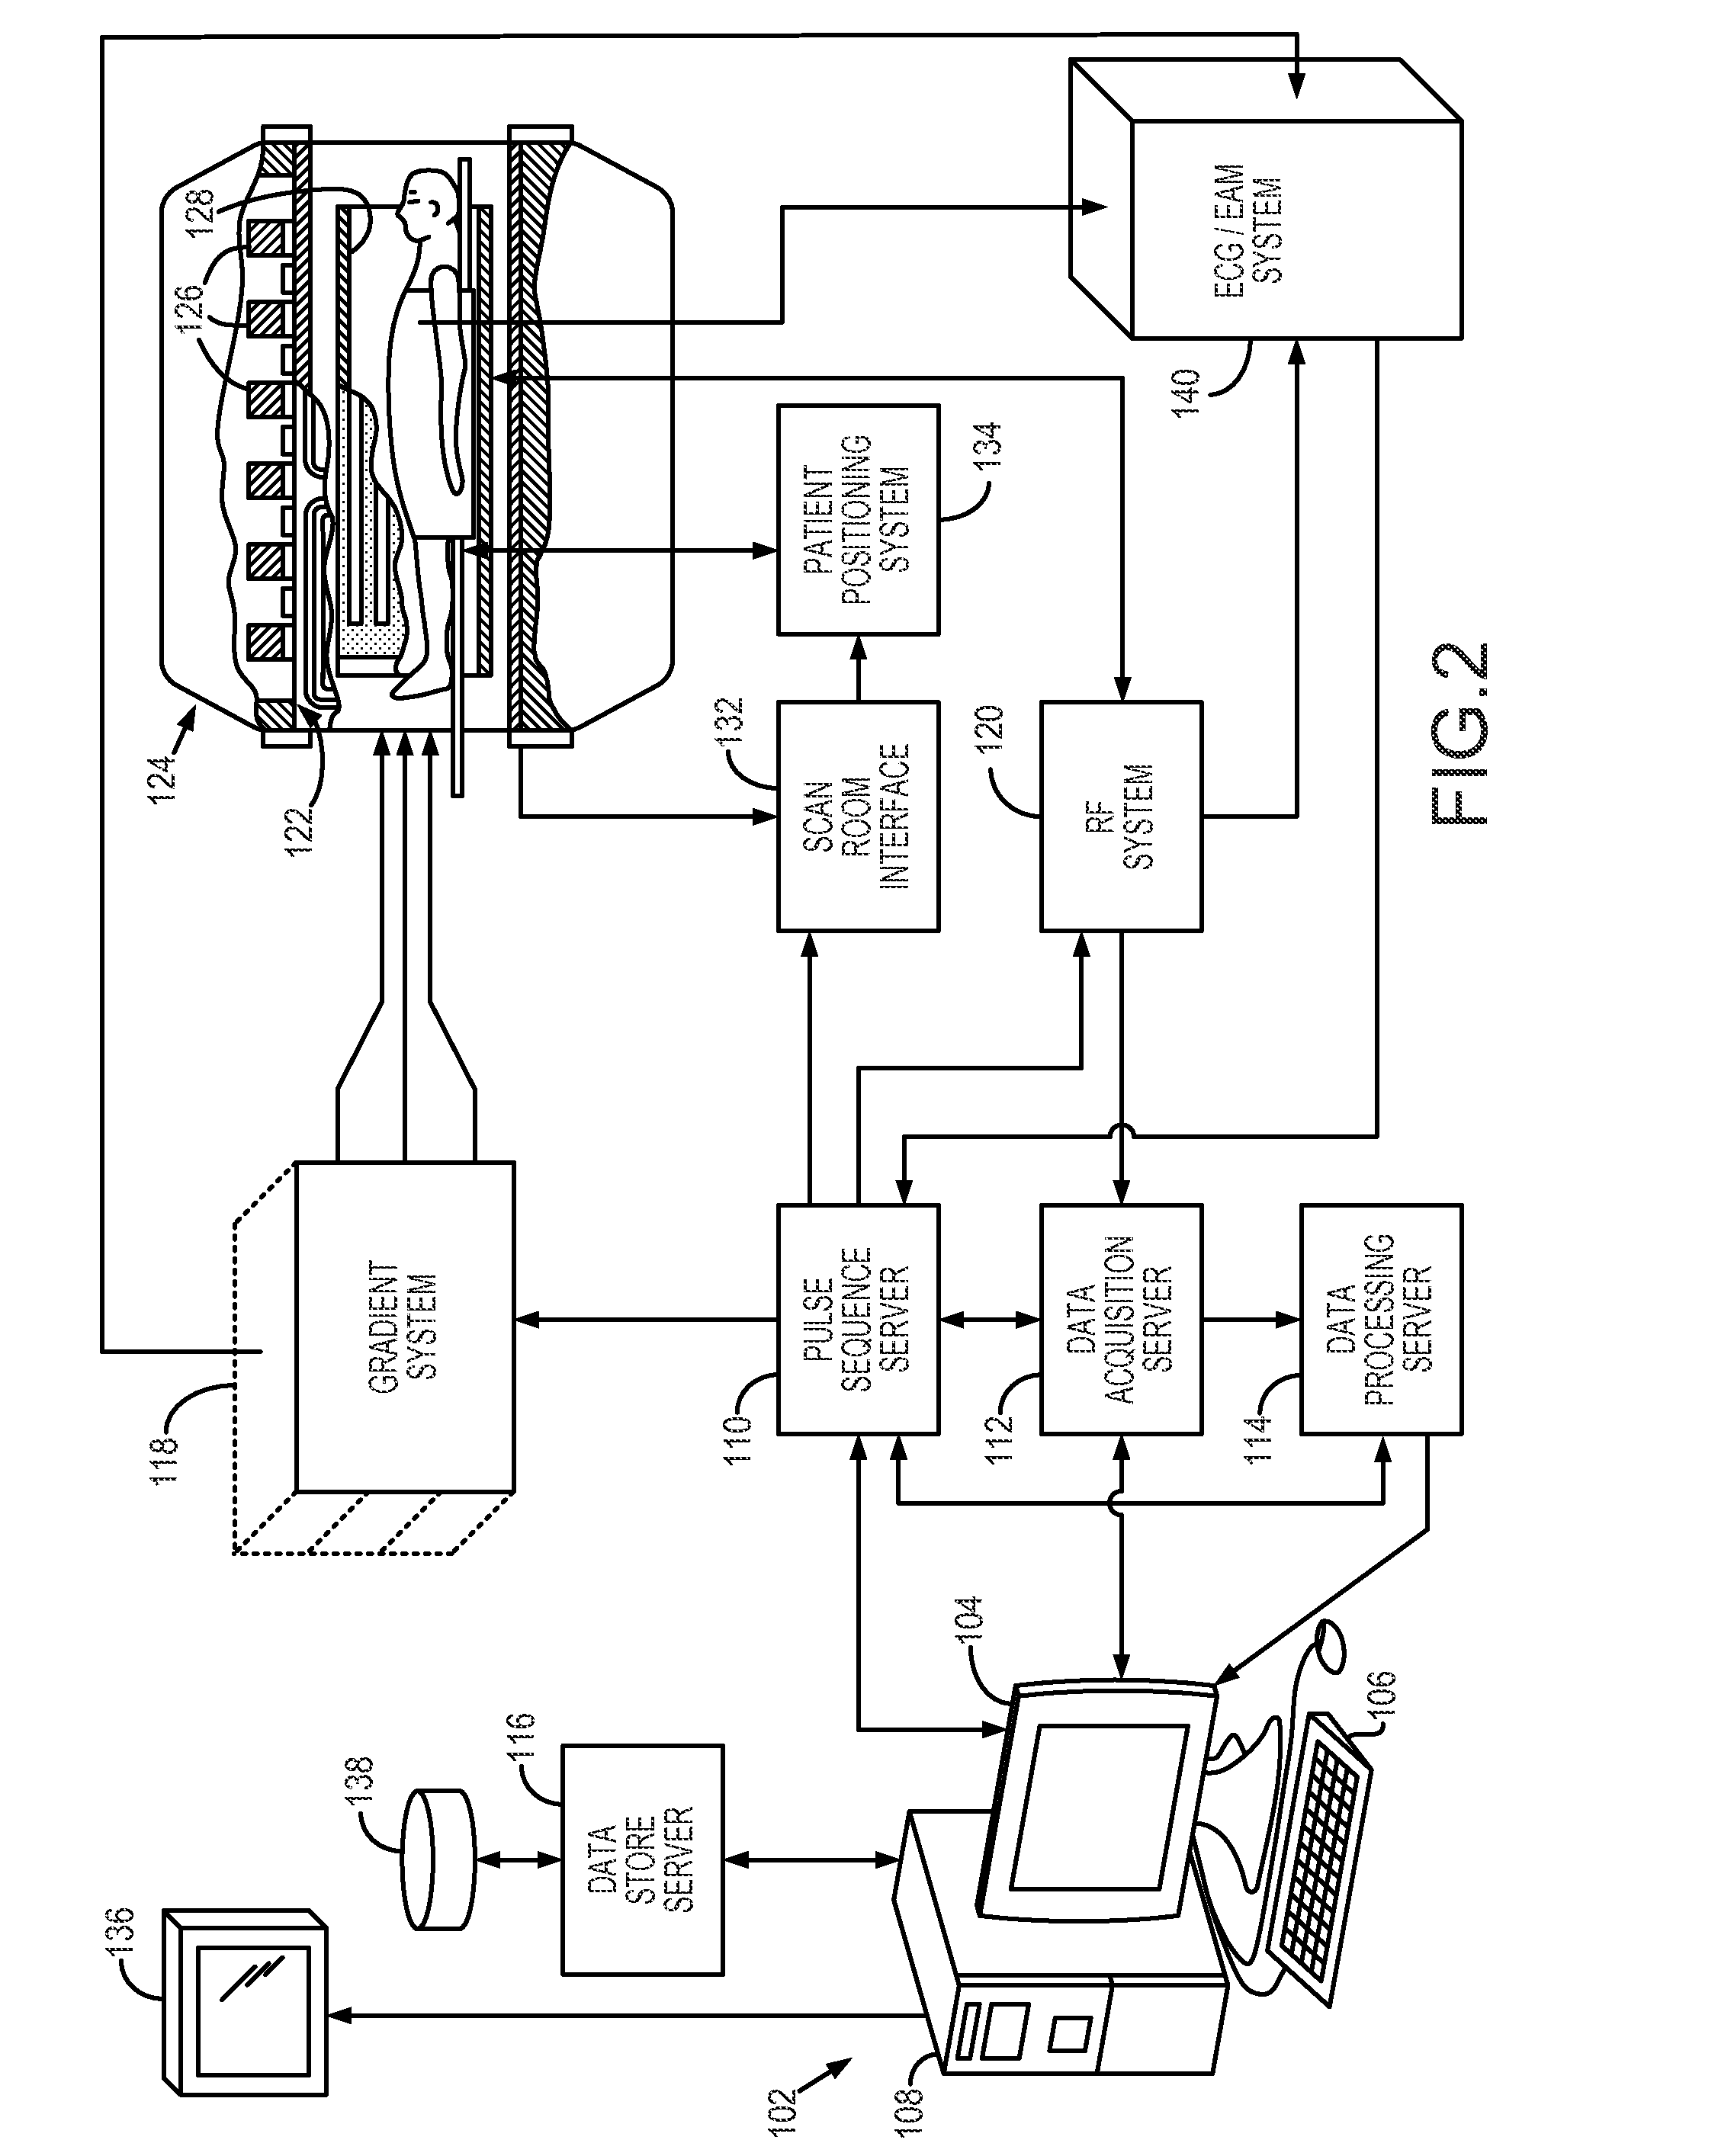 Noise tolerant localization systems and methods